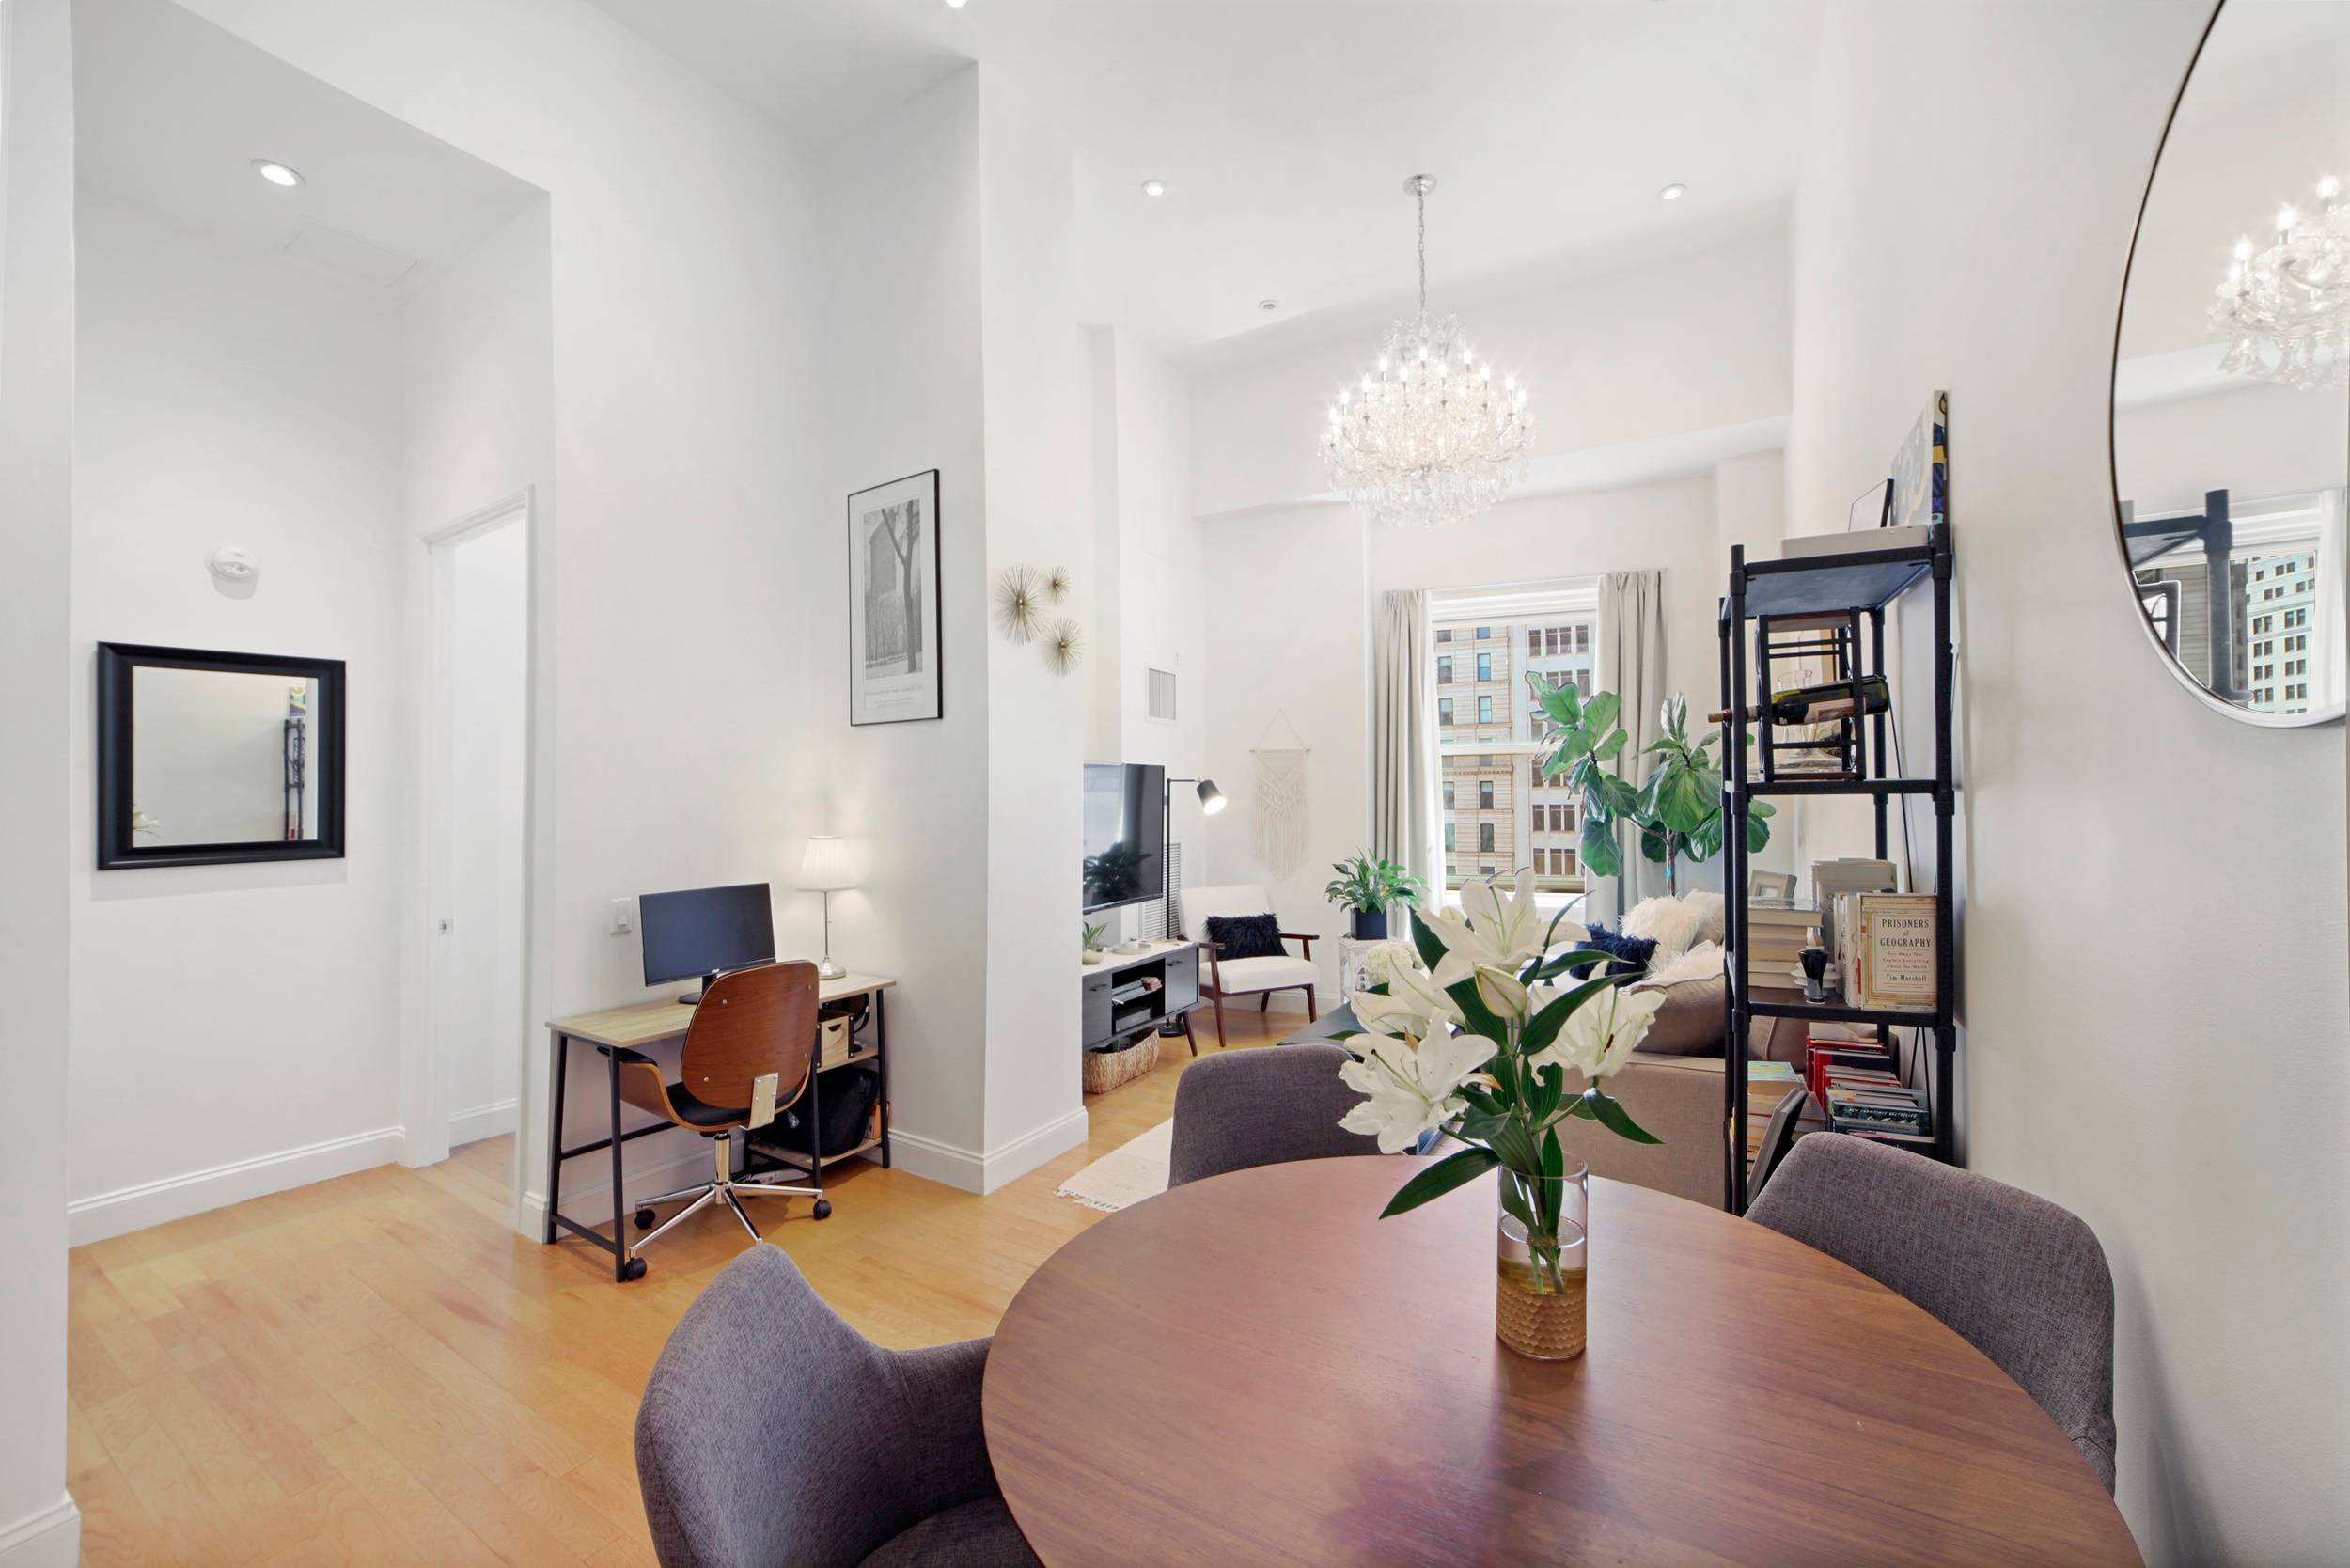 Convertible 2 bedroom loft in FiDi in a full service, white glove building with amenities